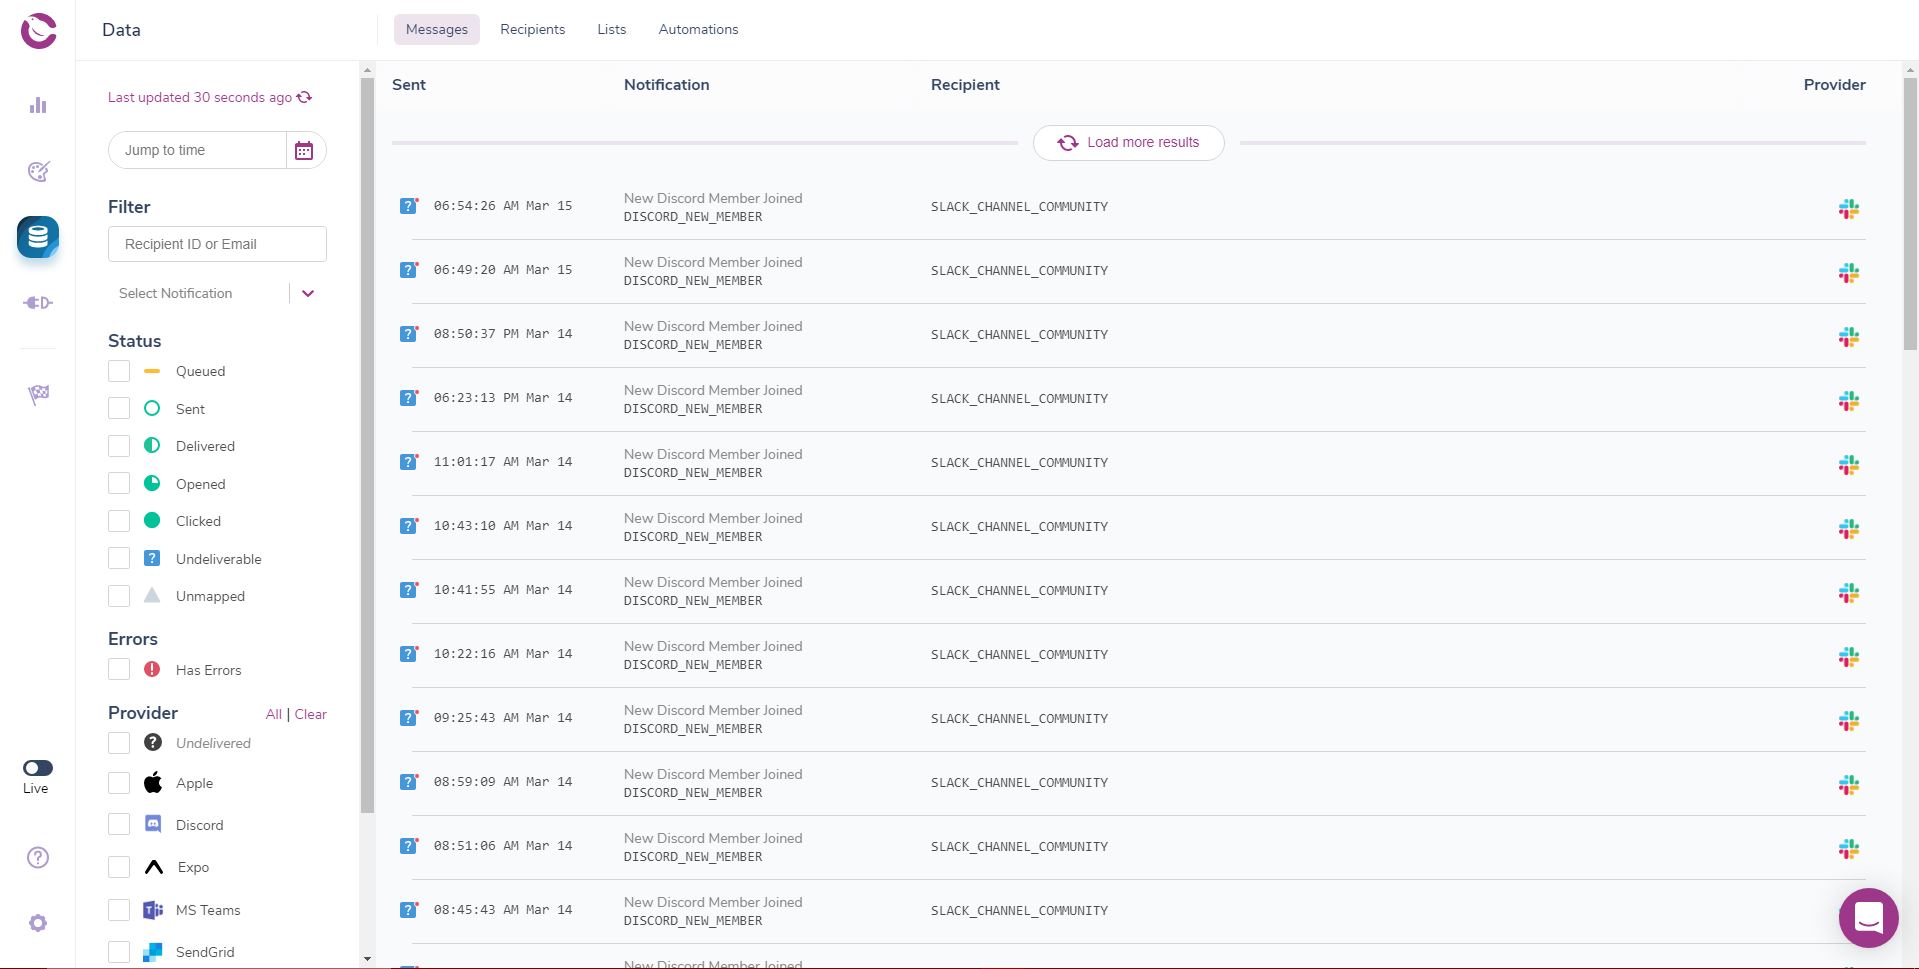 Courier audit log manager dashboard specifically looking at the actions taken with each notification type.